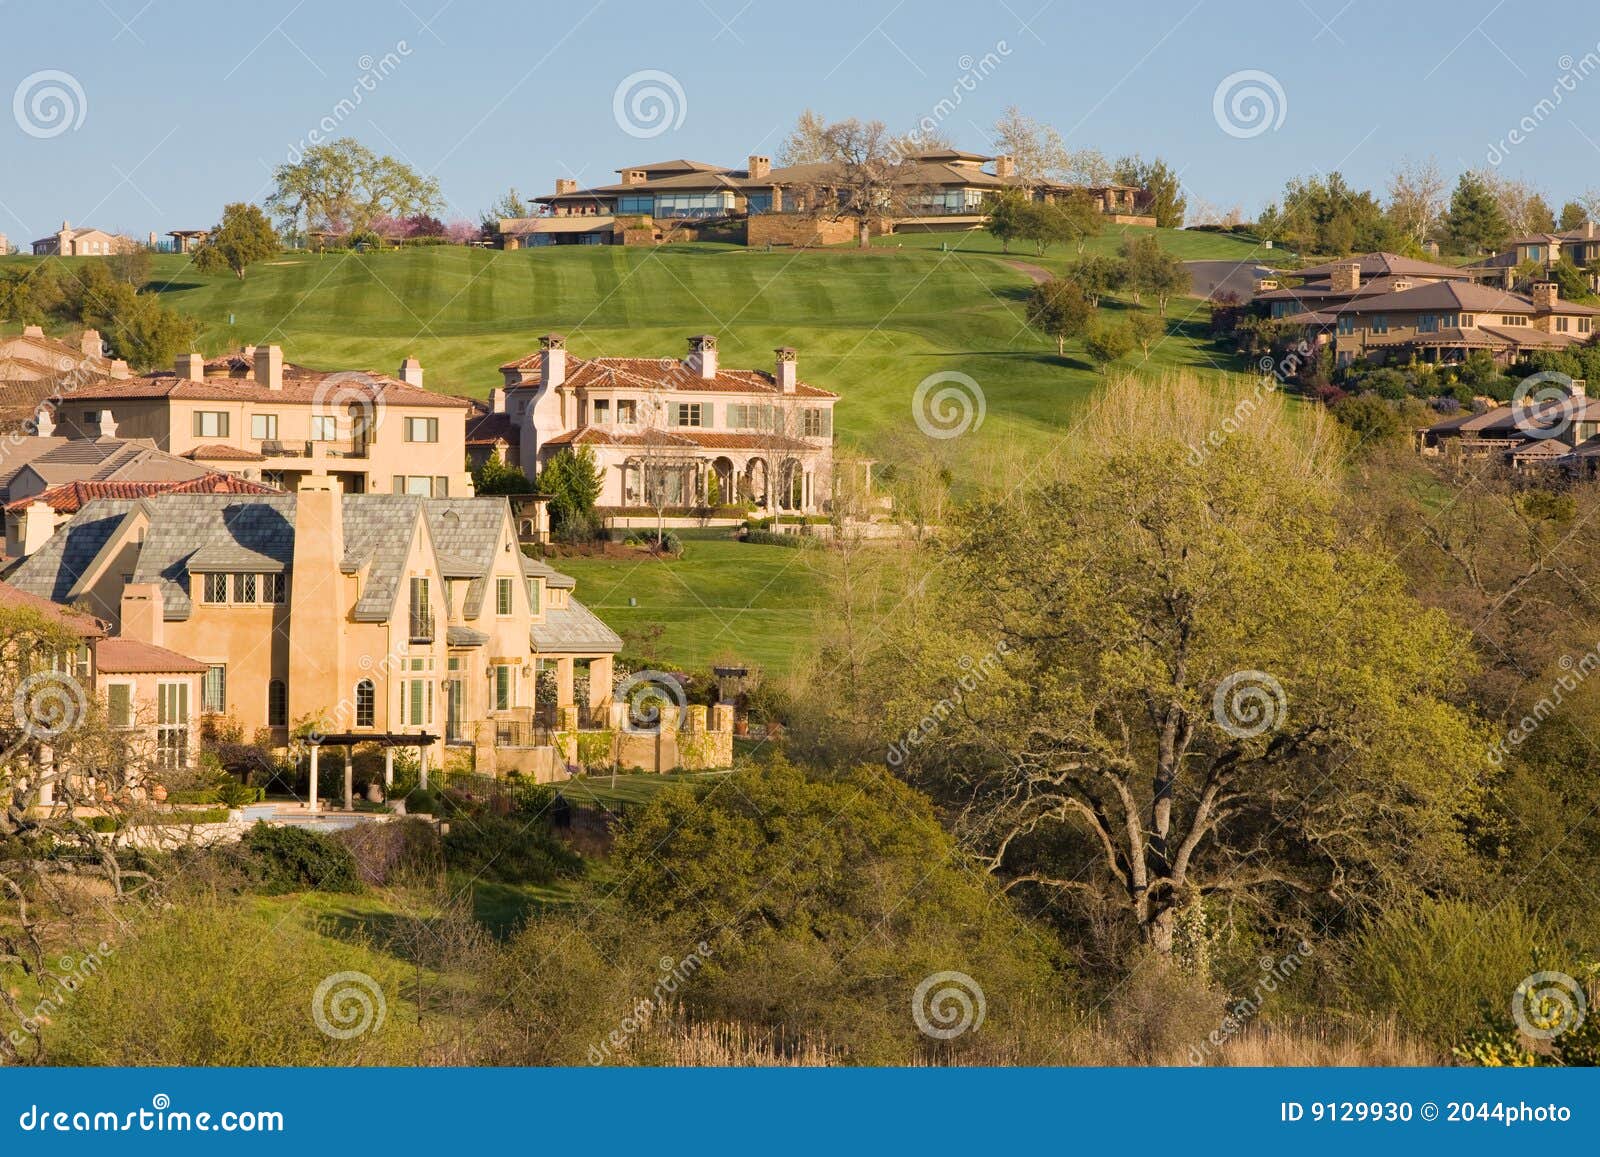 residential homes on a hilly golf course